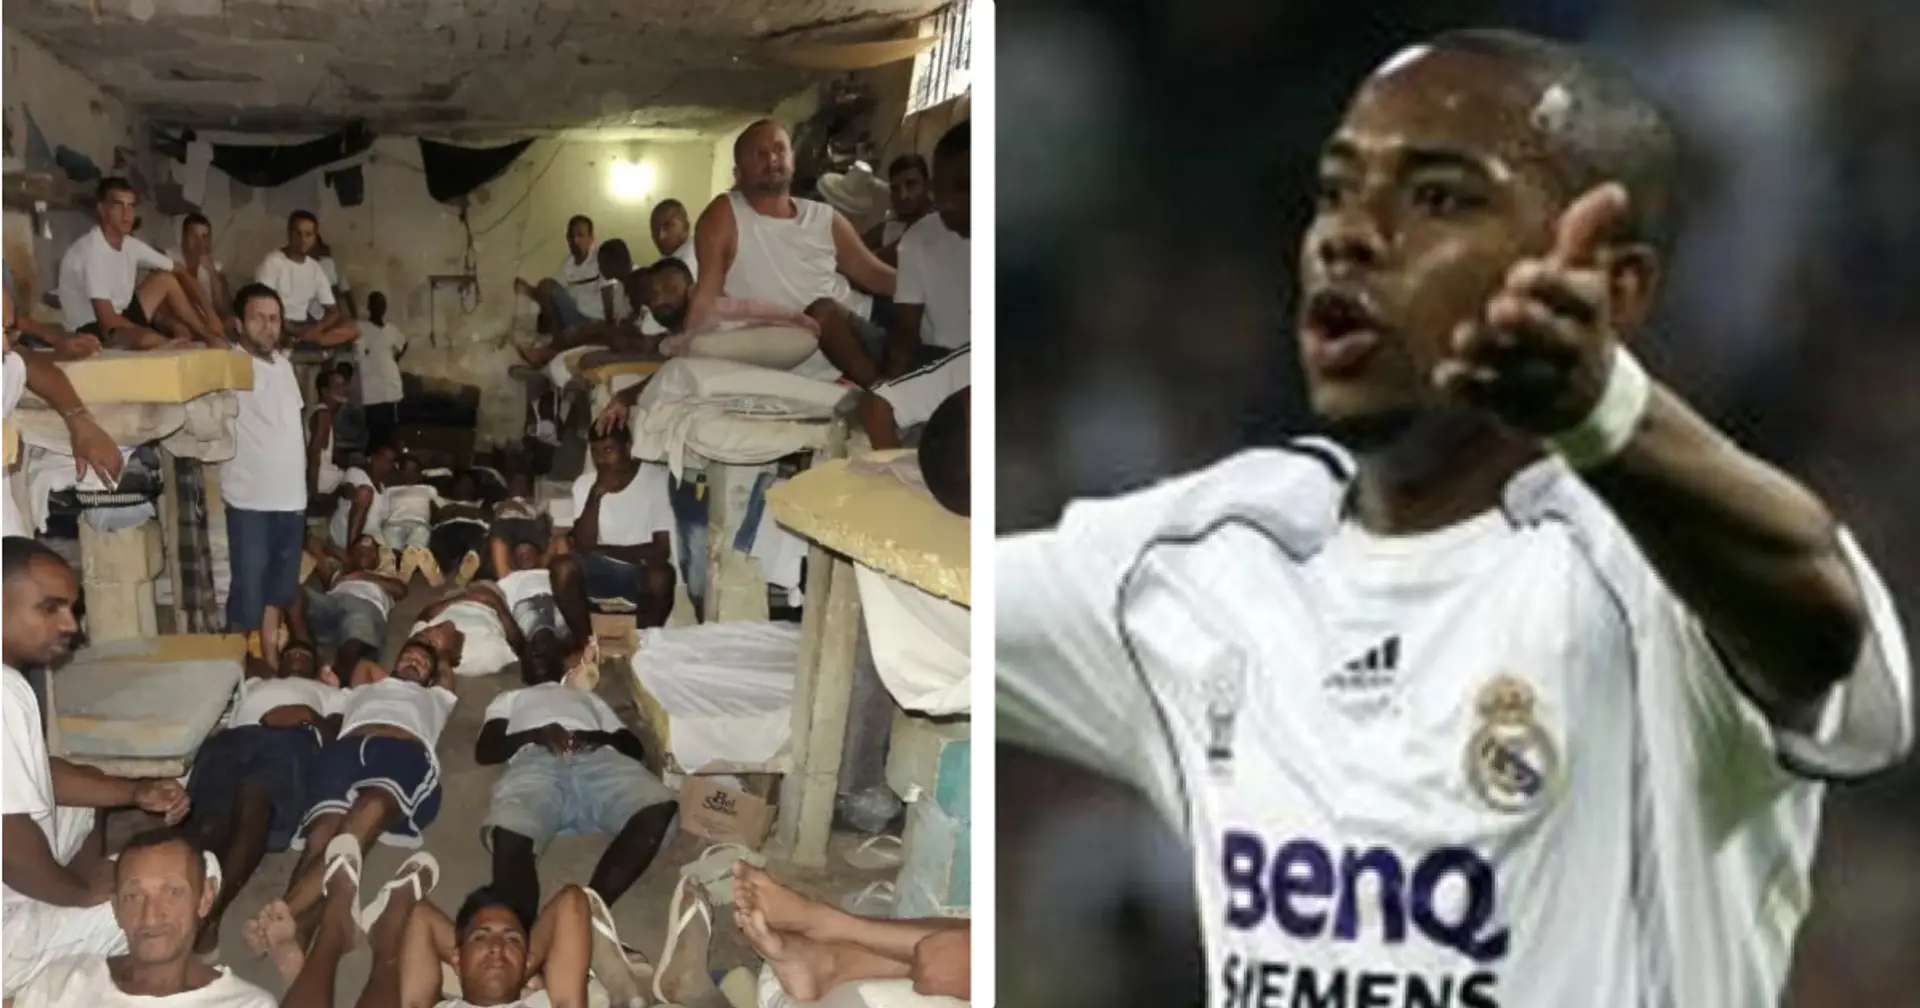 8-metre cell full of murderers, first football match: Robinho's living conditions in prison revealed